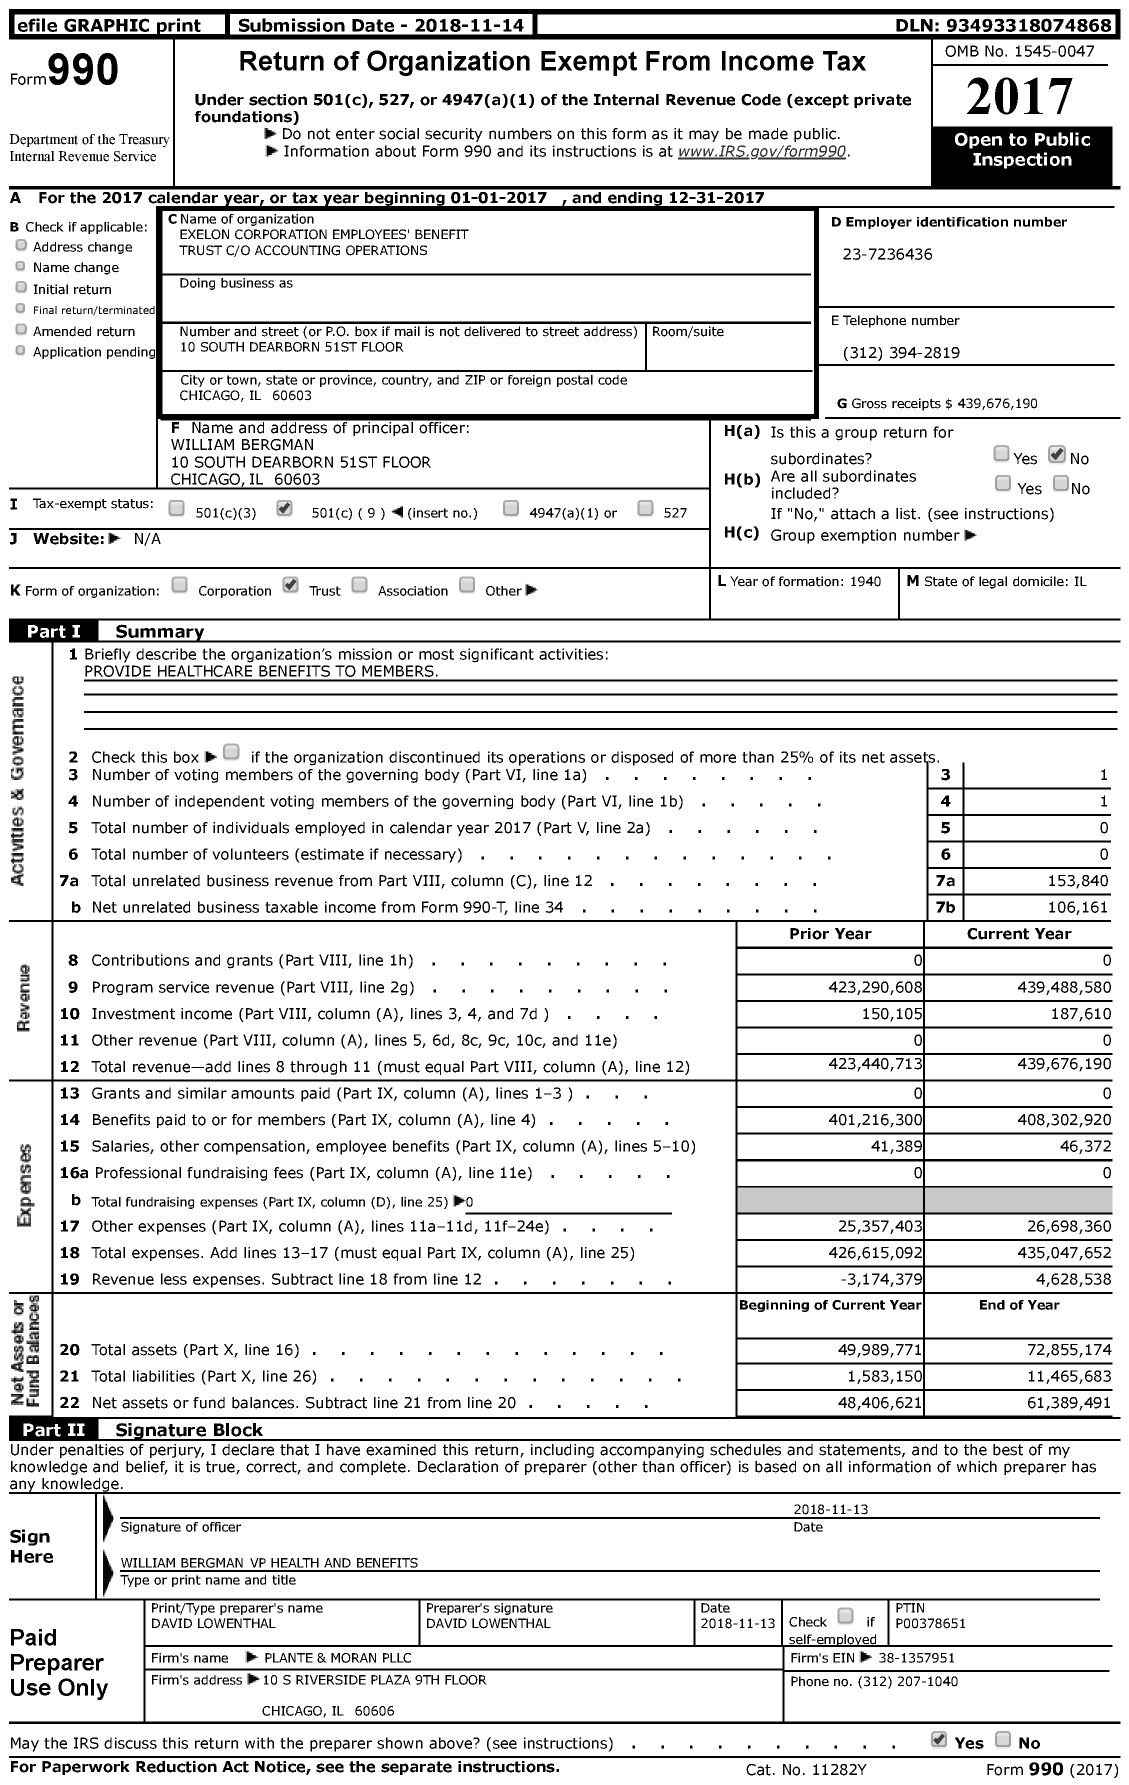 Image of first page of 2017 Form 990 for Exelon Corporation Employees' Benefit Trust